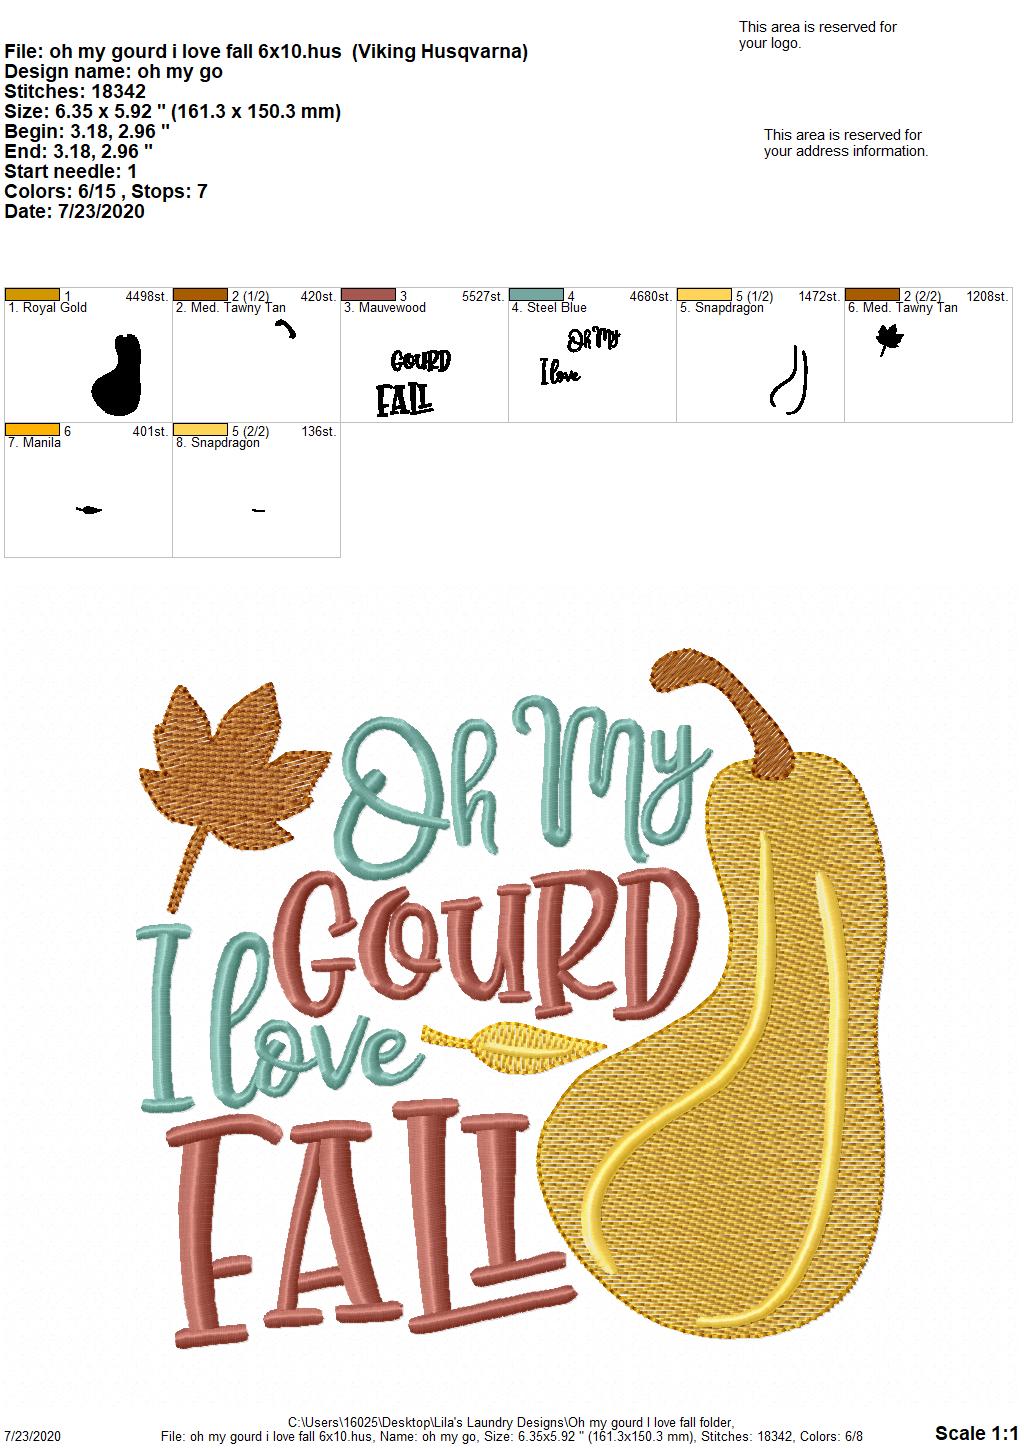 Oh My Gourd I love Fall - 2 Sizes - Digital Embroidery Design